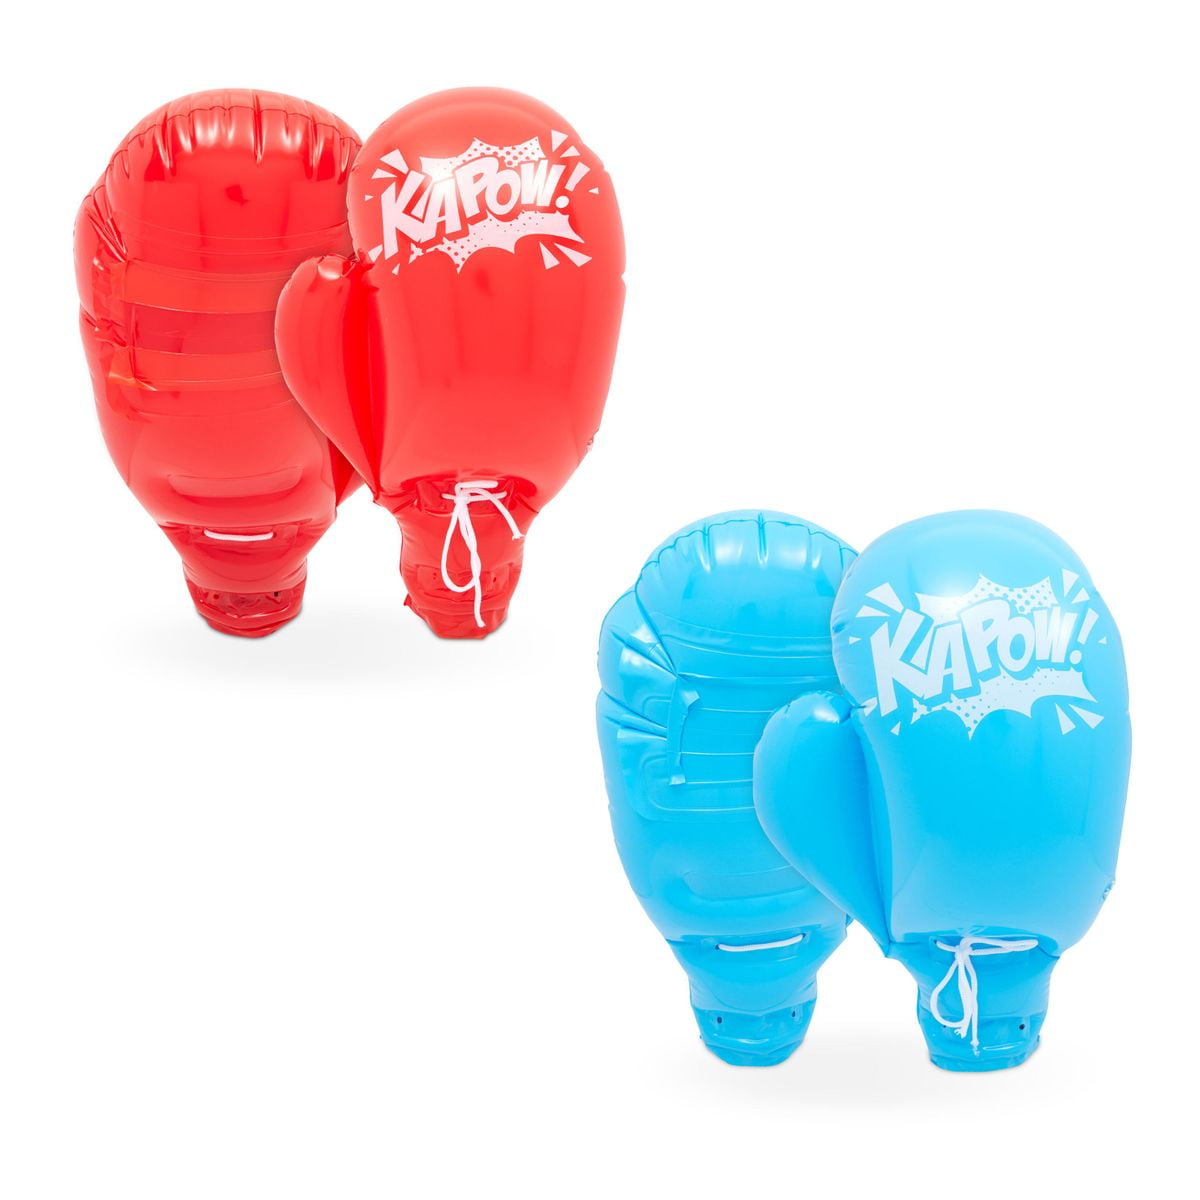 Red & Blue Pair GIFT Boxing gloves 2-Pack Banzai Inflatable NEW SEALED! 